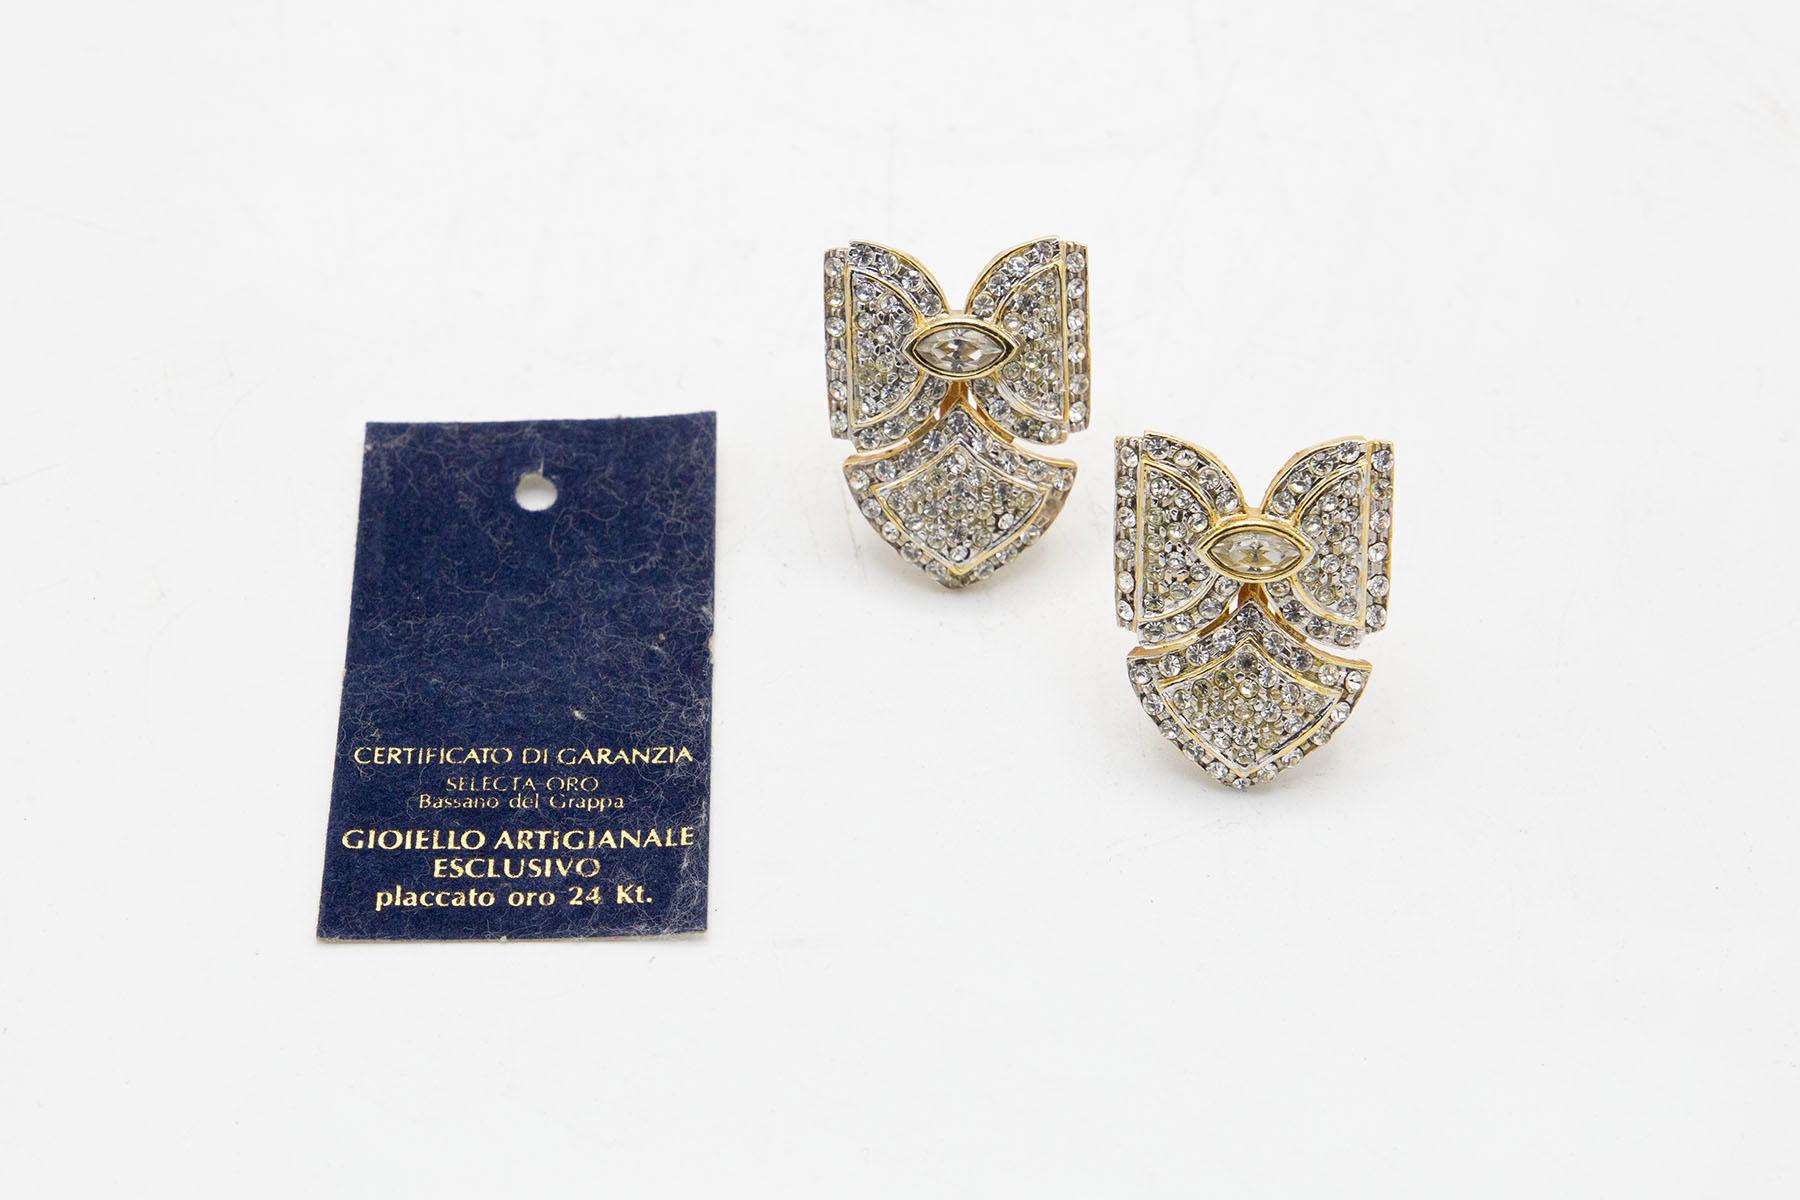 Elegant pair of Italian bow-shaped earrings with clips in the back. The earrings are 24 kt. gold plated and are finely implemented with rhinestones, including a central one.
The earrings were forged in Bassano del Grappa Brescia italy by an Italian